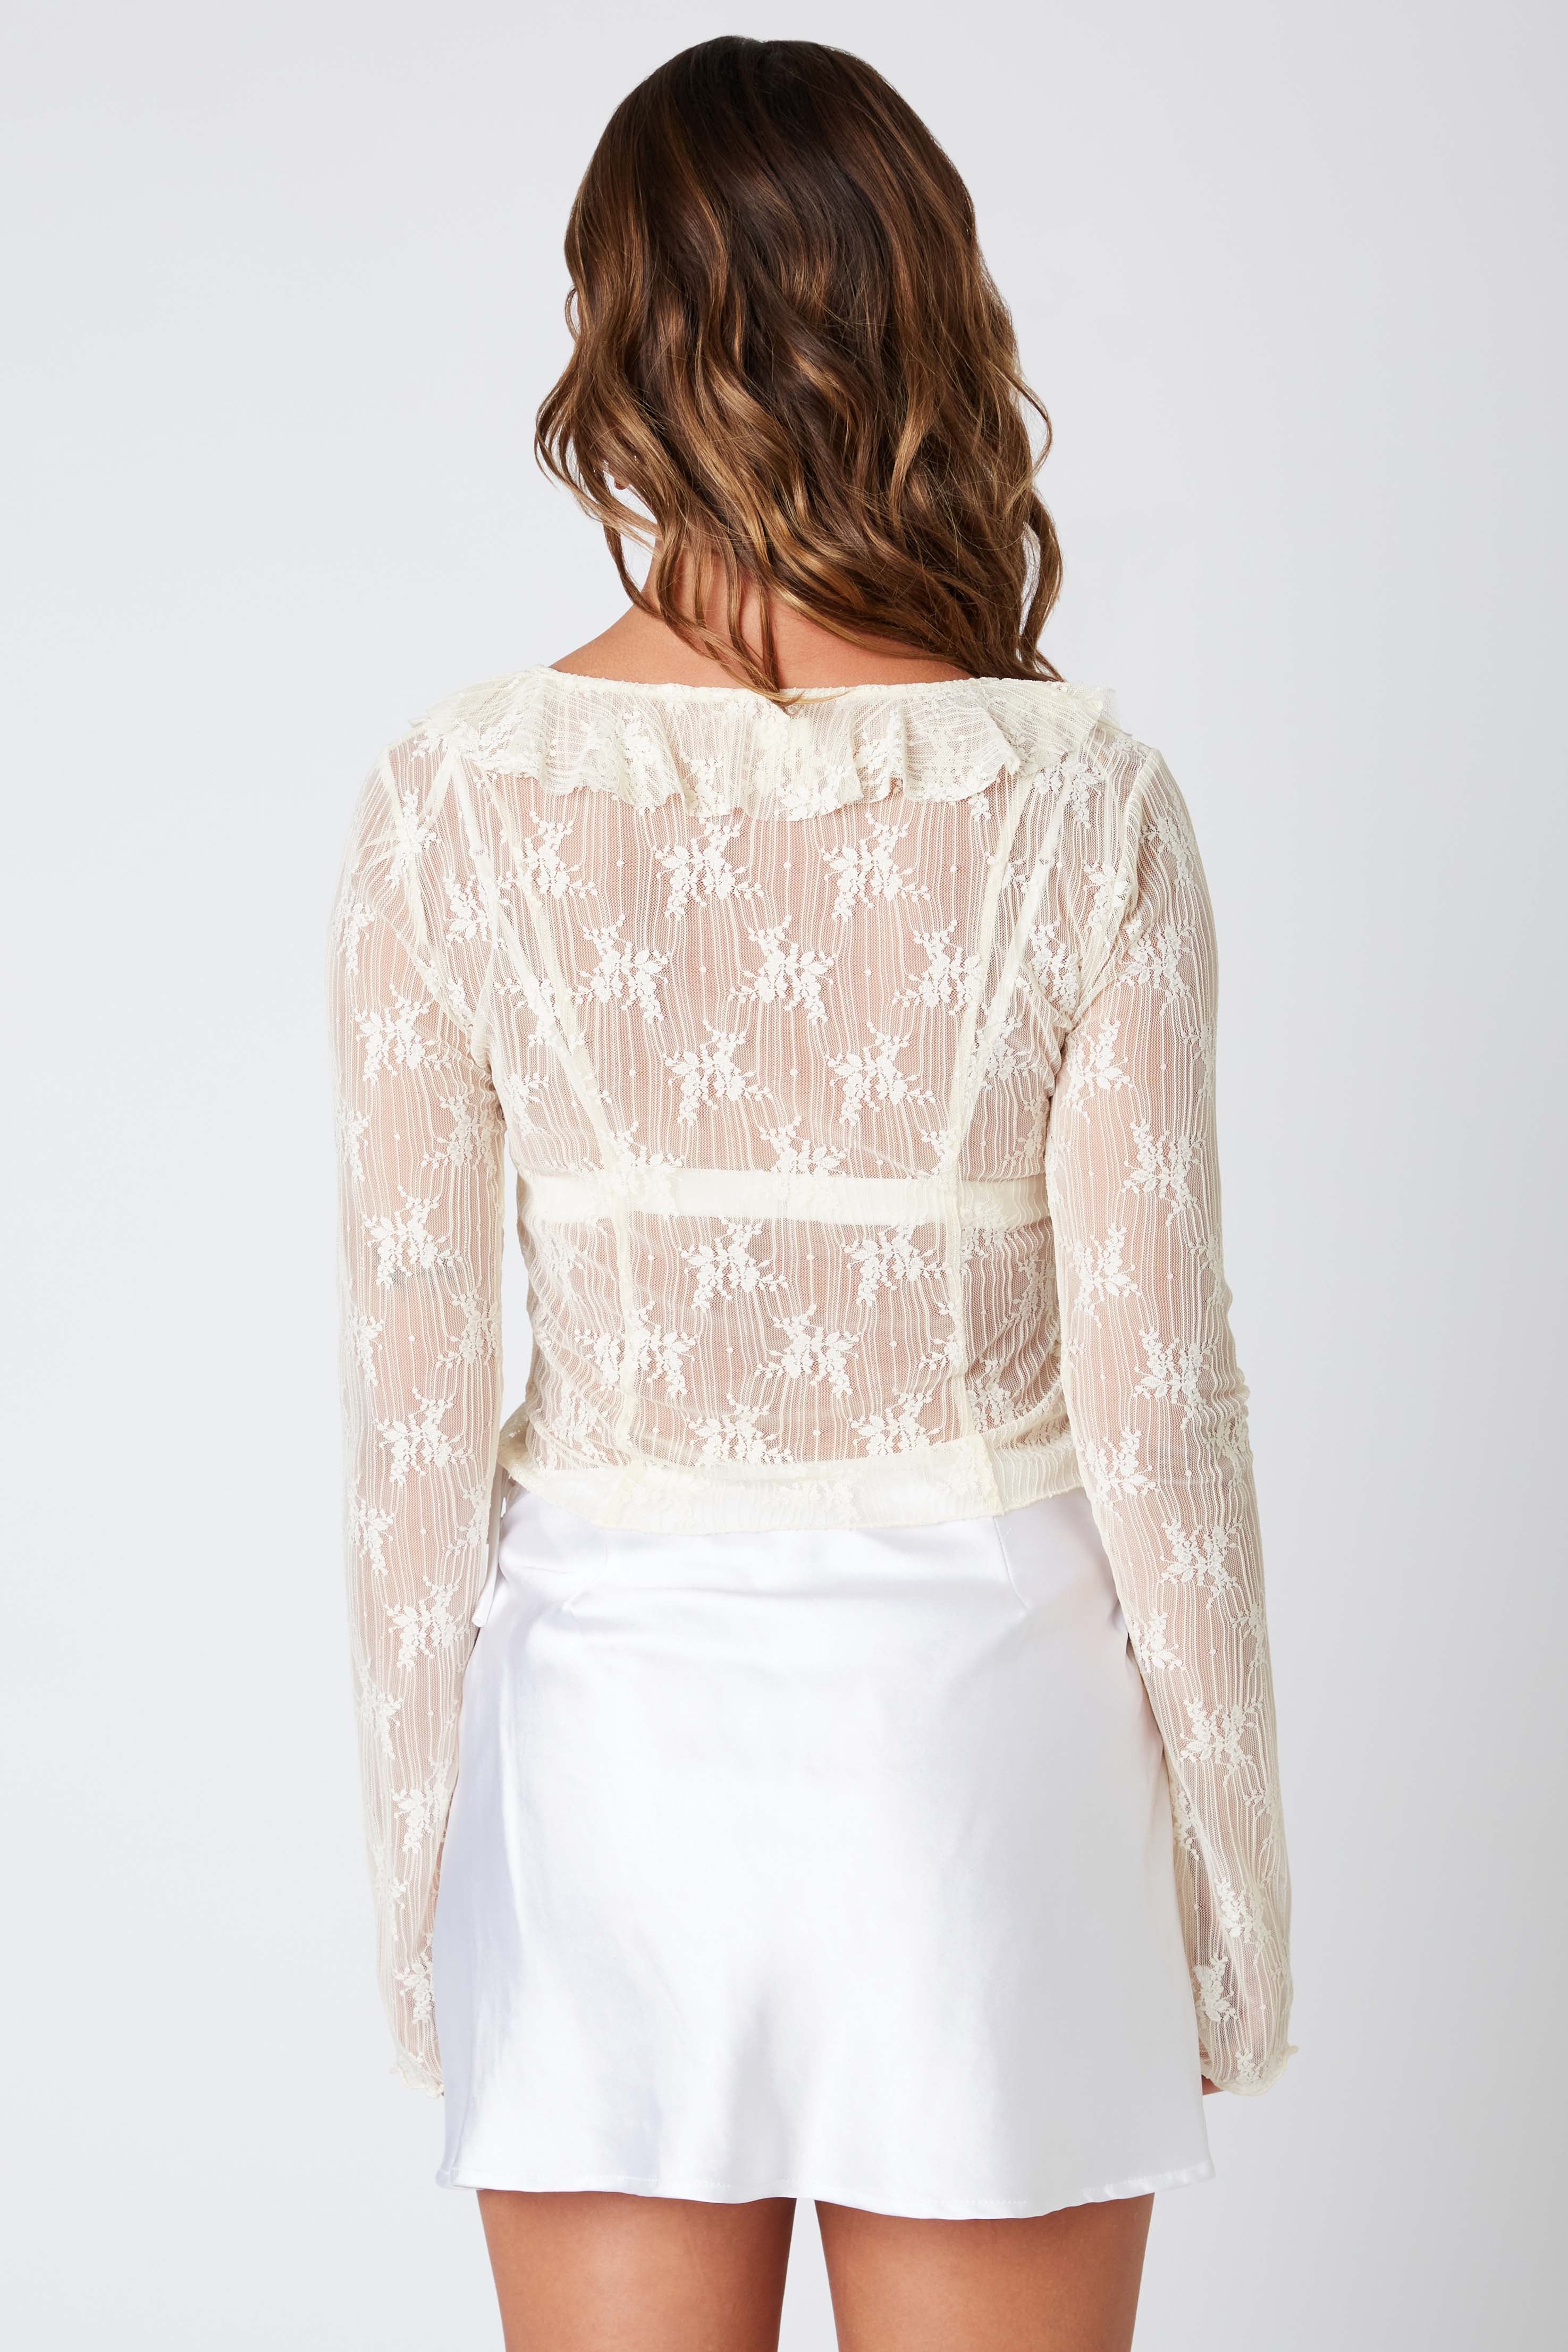 Long Sleeve Lace Cover-Up in Ivory Back View